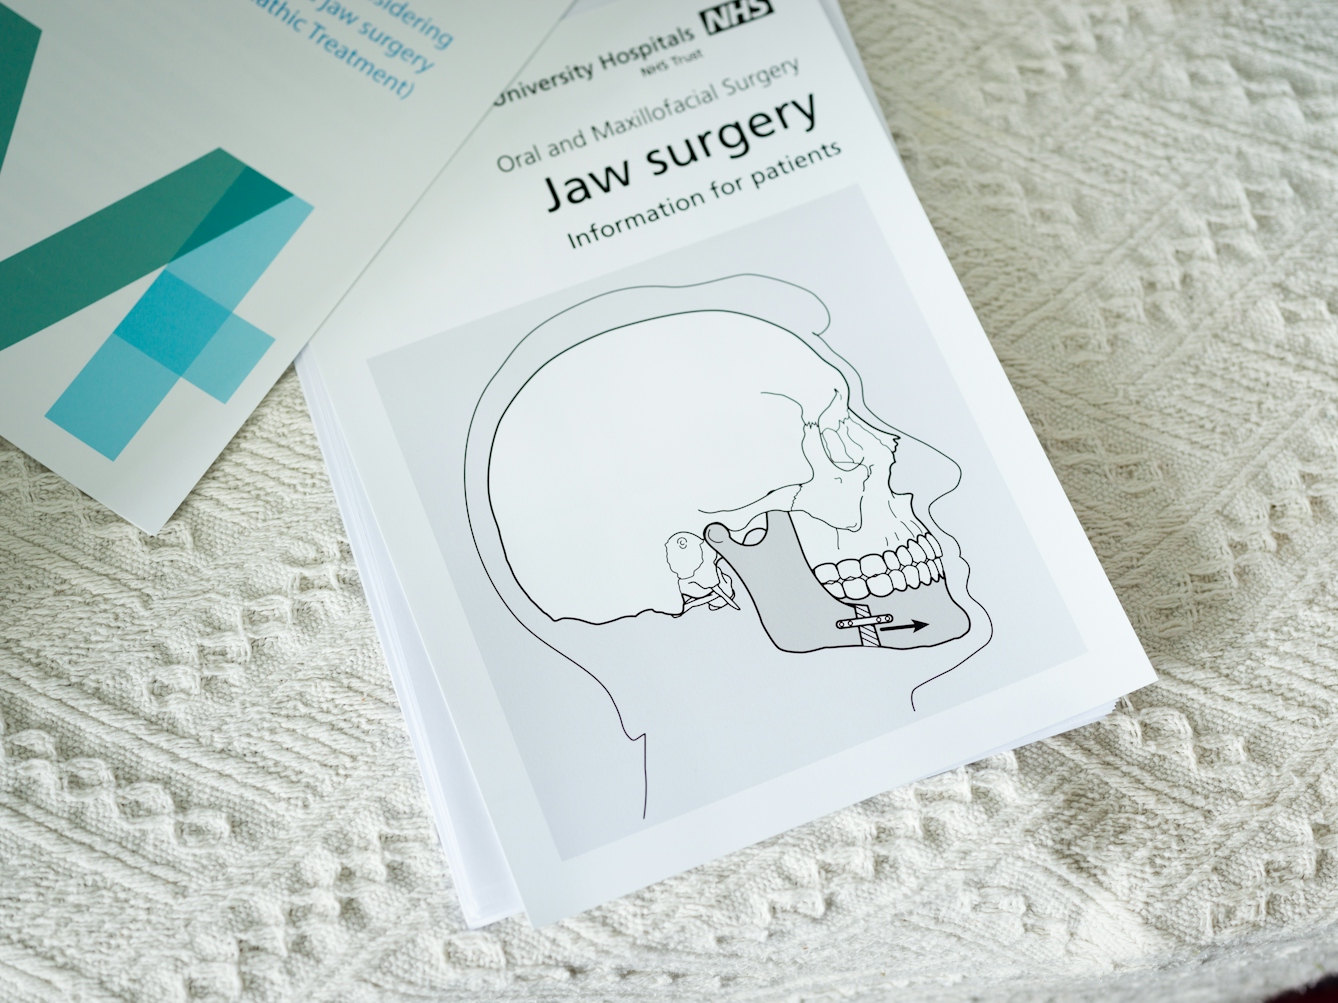 Photograph of a table top covered in a white textured fabric tablecloth. On top of the fabric are several sheets of printed A4 paper. The sheet in the centre of the image is titled, 'Jaw surgery, Information for patients'. Under the title is a diagram of a human head in profile and cross section, revealing the skull. The jaw line has graphical representations of the surgical procedure in the form of bracing and an arrow.